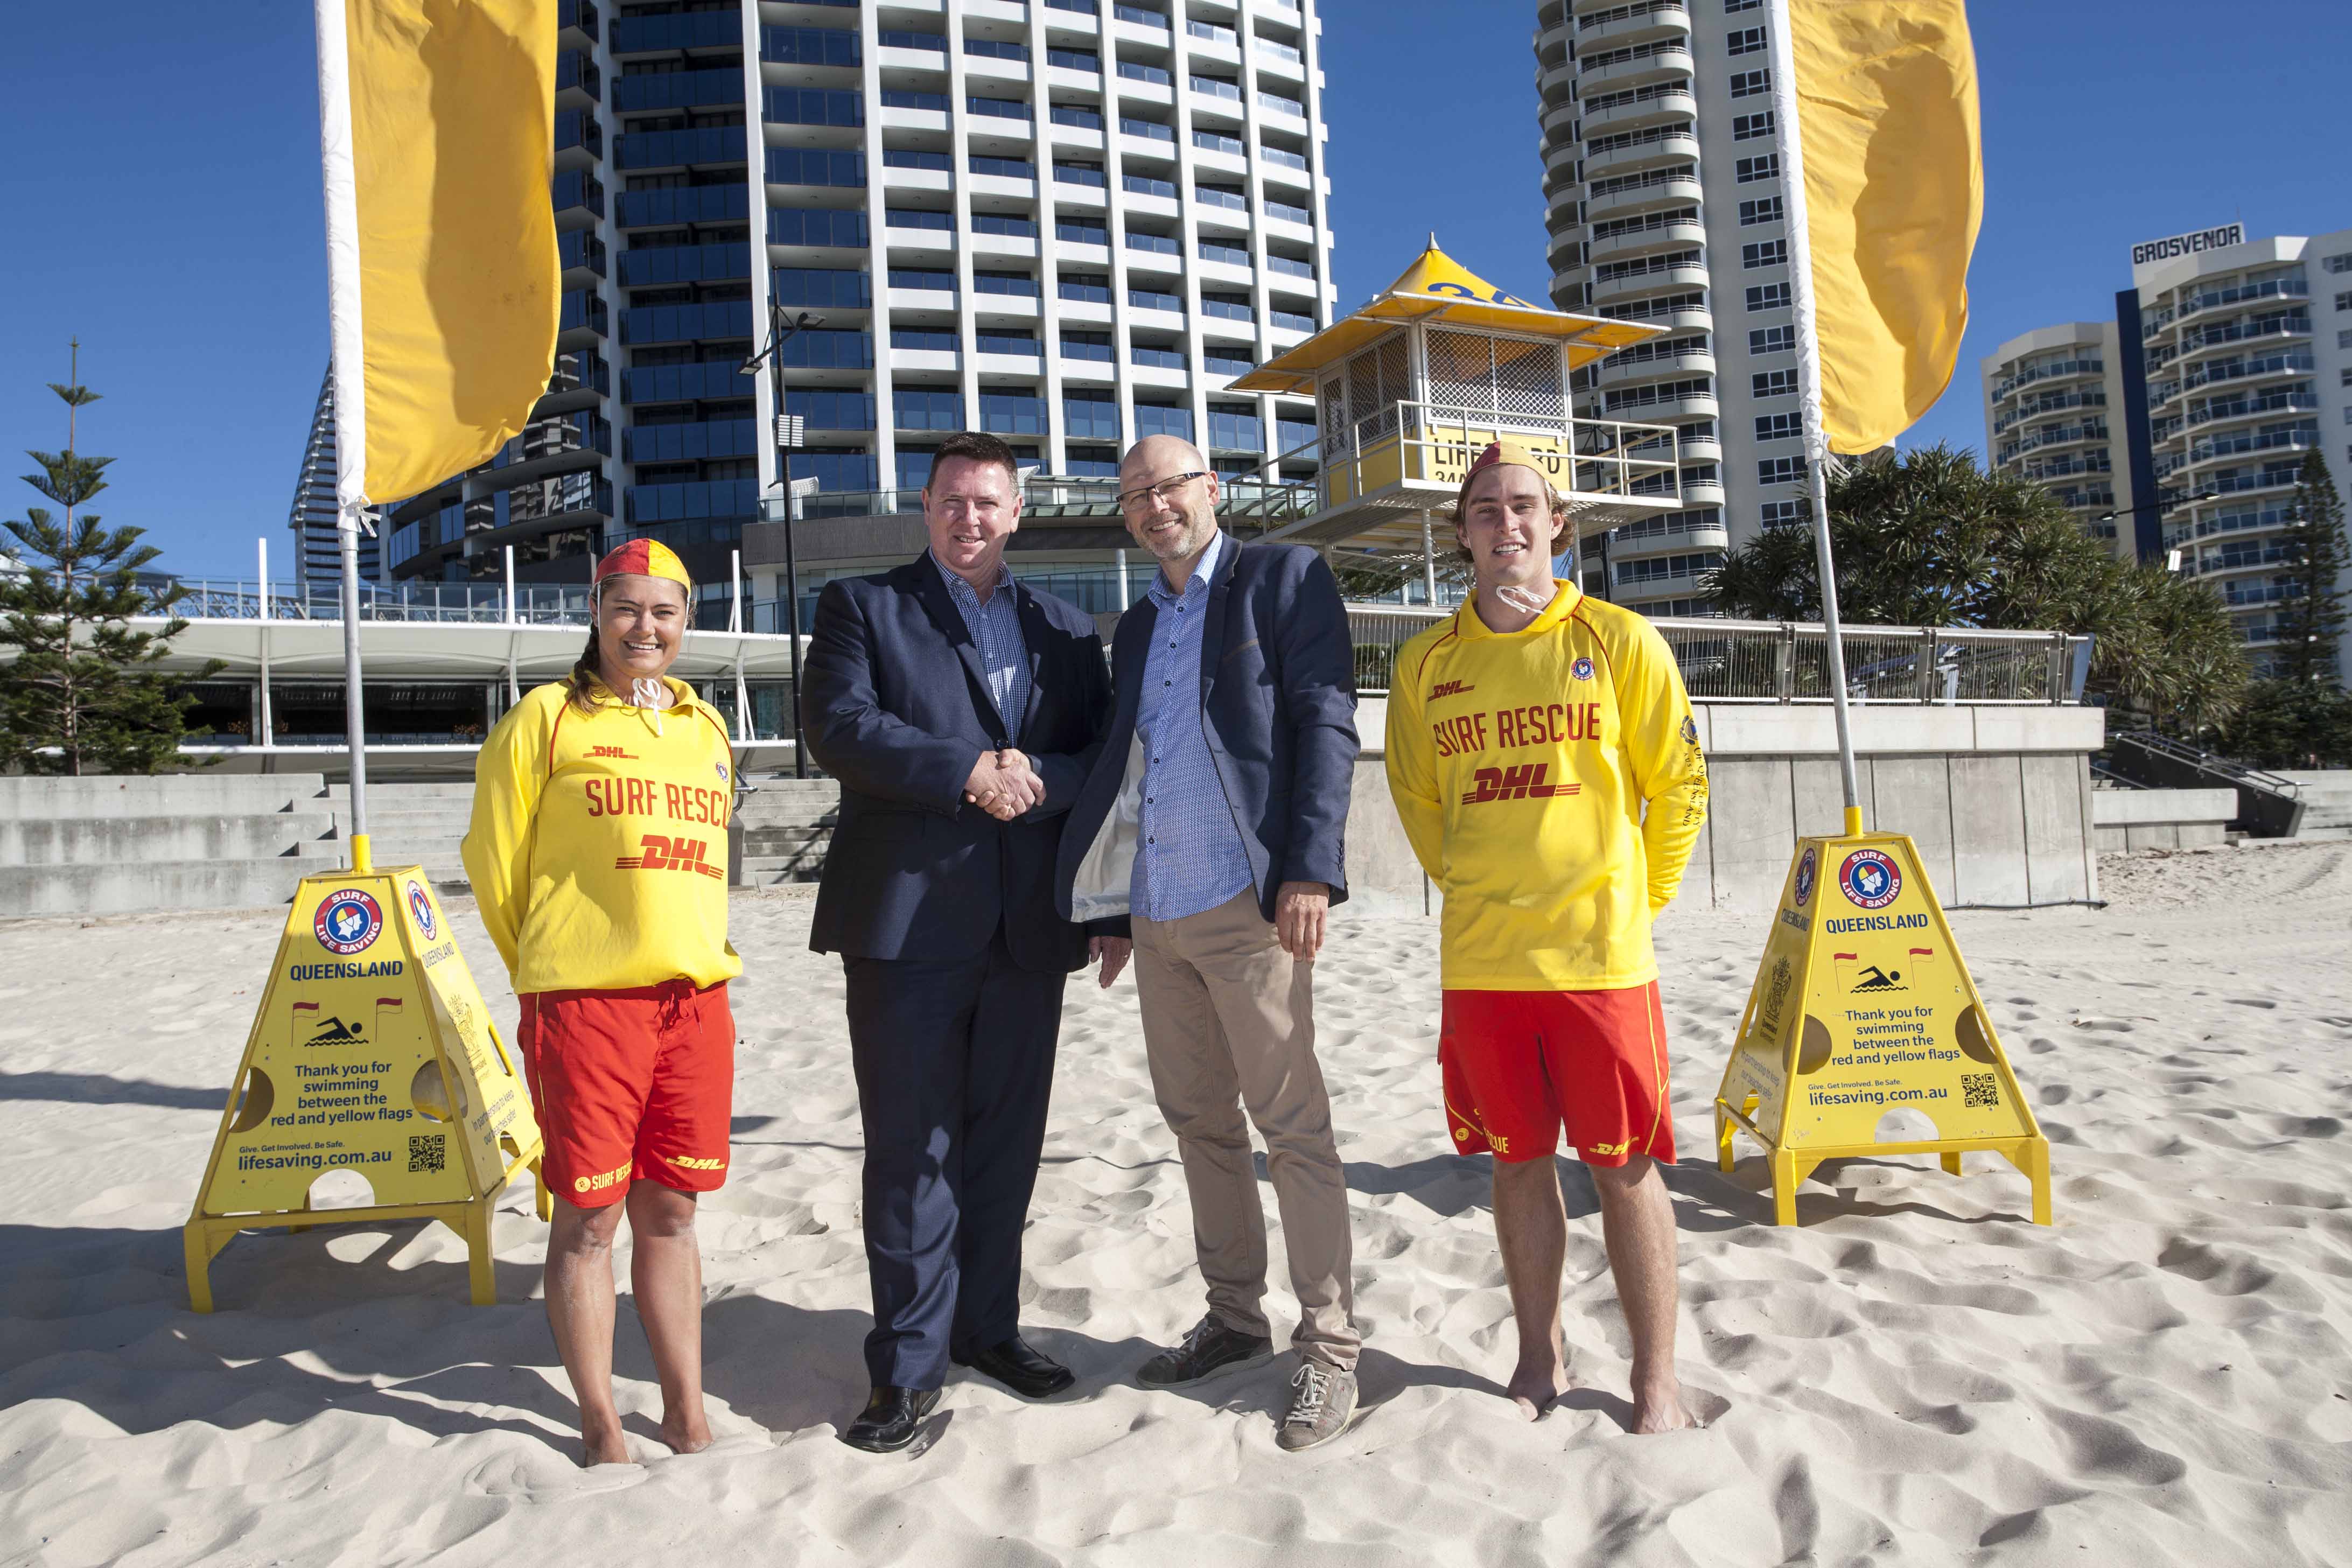 Pictured - John Brennan and Tomas Johnsson with two SLSQ lifeguards